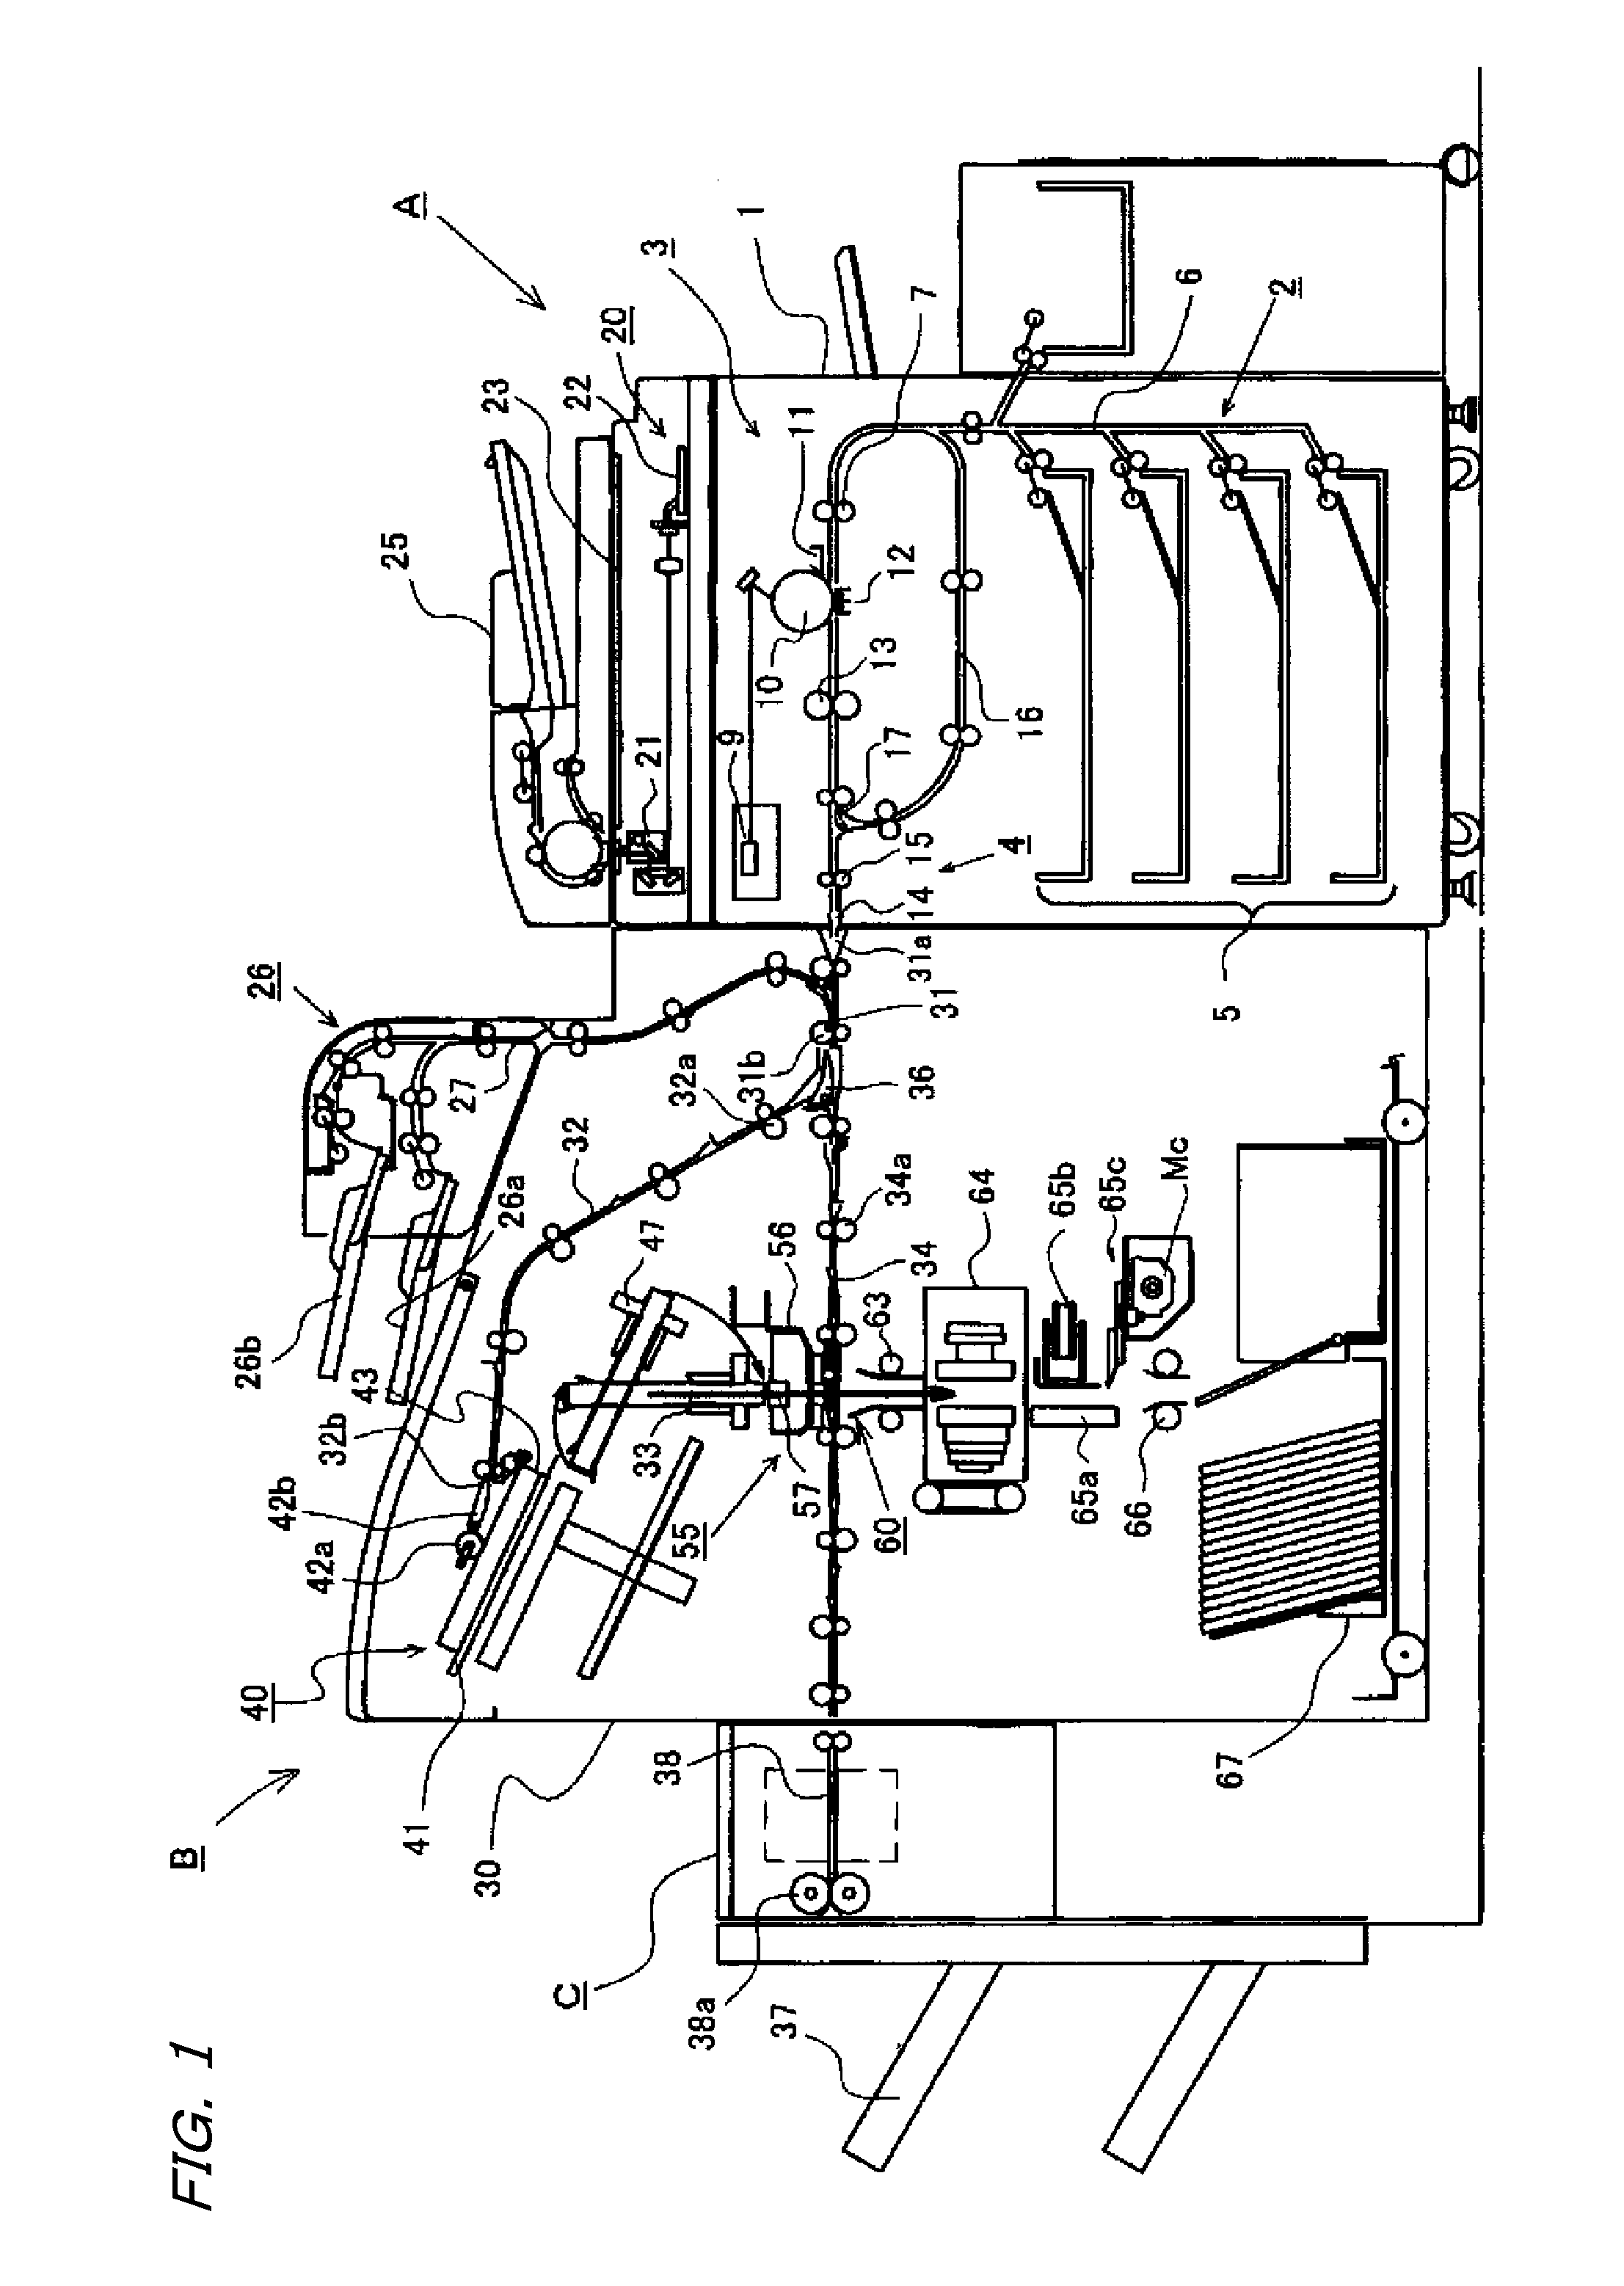 Bookbinding Unit and Image-Forming System